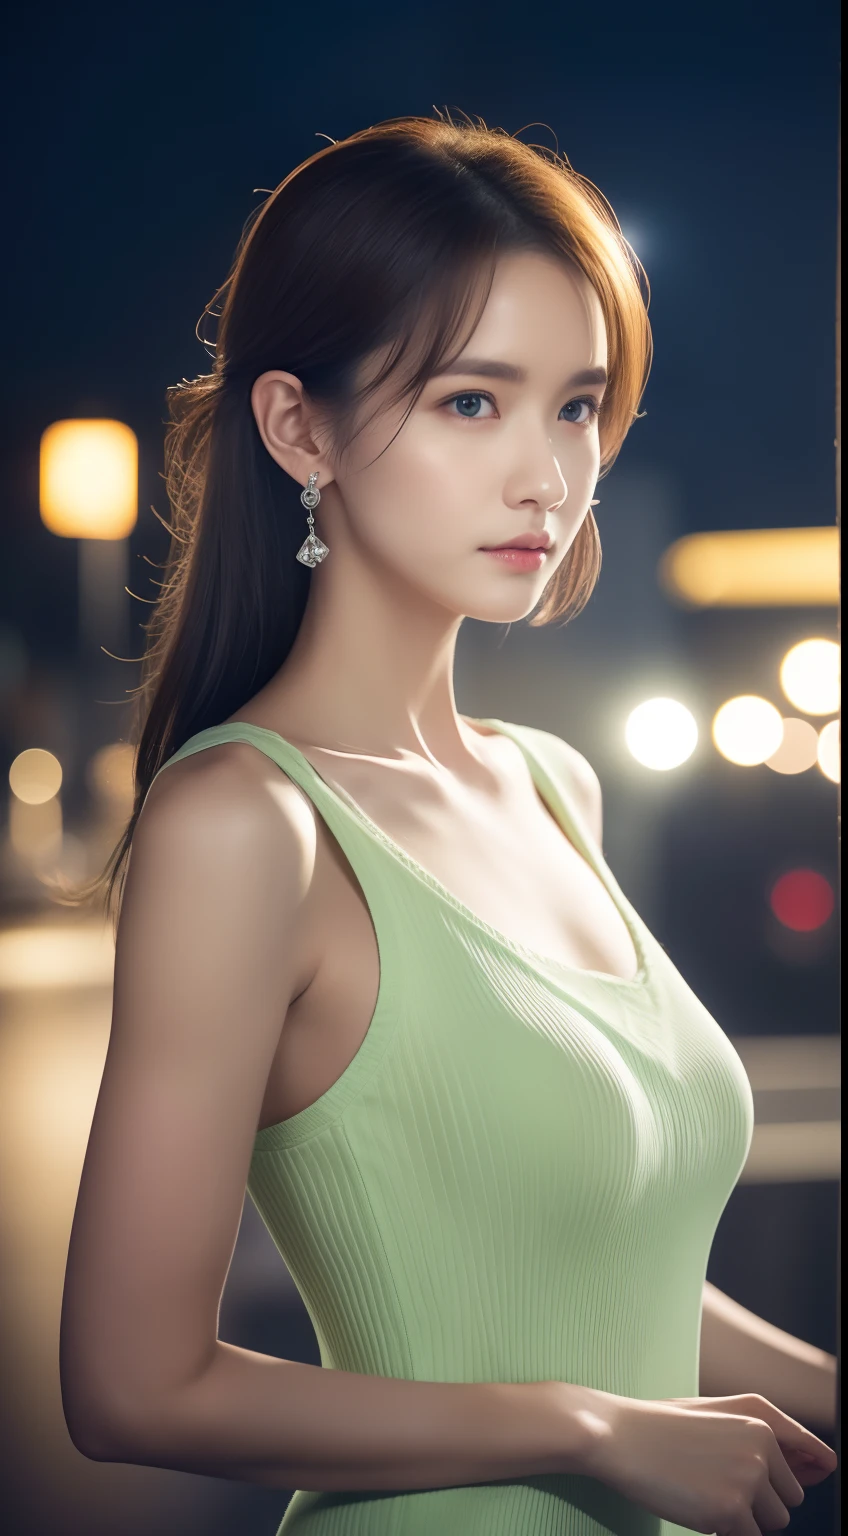 (Stand on a dark street),(the street lights),(Low-key lighting),(Night),randome pose, (An extremely delicate and beautiful work), (Masterpiece), 1girll, Highly detailed, waist leaking, Ponytail Contortion, Enchanted expression, beautiful and clear eyes, green eye pupil, Delicate necklace, Delicate earrings, fairy ears, Simple blurred background, Extreme detail description, Beautiful, Charming, Ultra-fine painting, Delicate face, Delicate figure, Fine collarbones, lovely lips, Beautiful breasts, soft behind, mix4,(8K, RAW photo, Best quality, Masterpiece:1.2), (Realistic, photo-realistic:1.37),1girll,Cute,Cityscape, Night, rain, Wet, Professional lighting, photon maping, Radio City, Physically-based rendering,